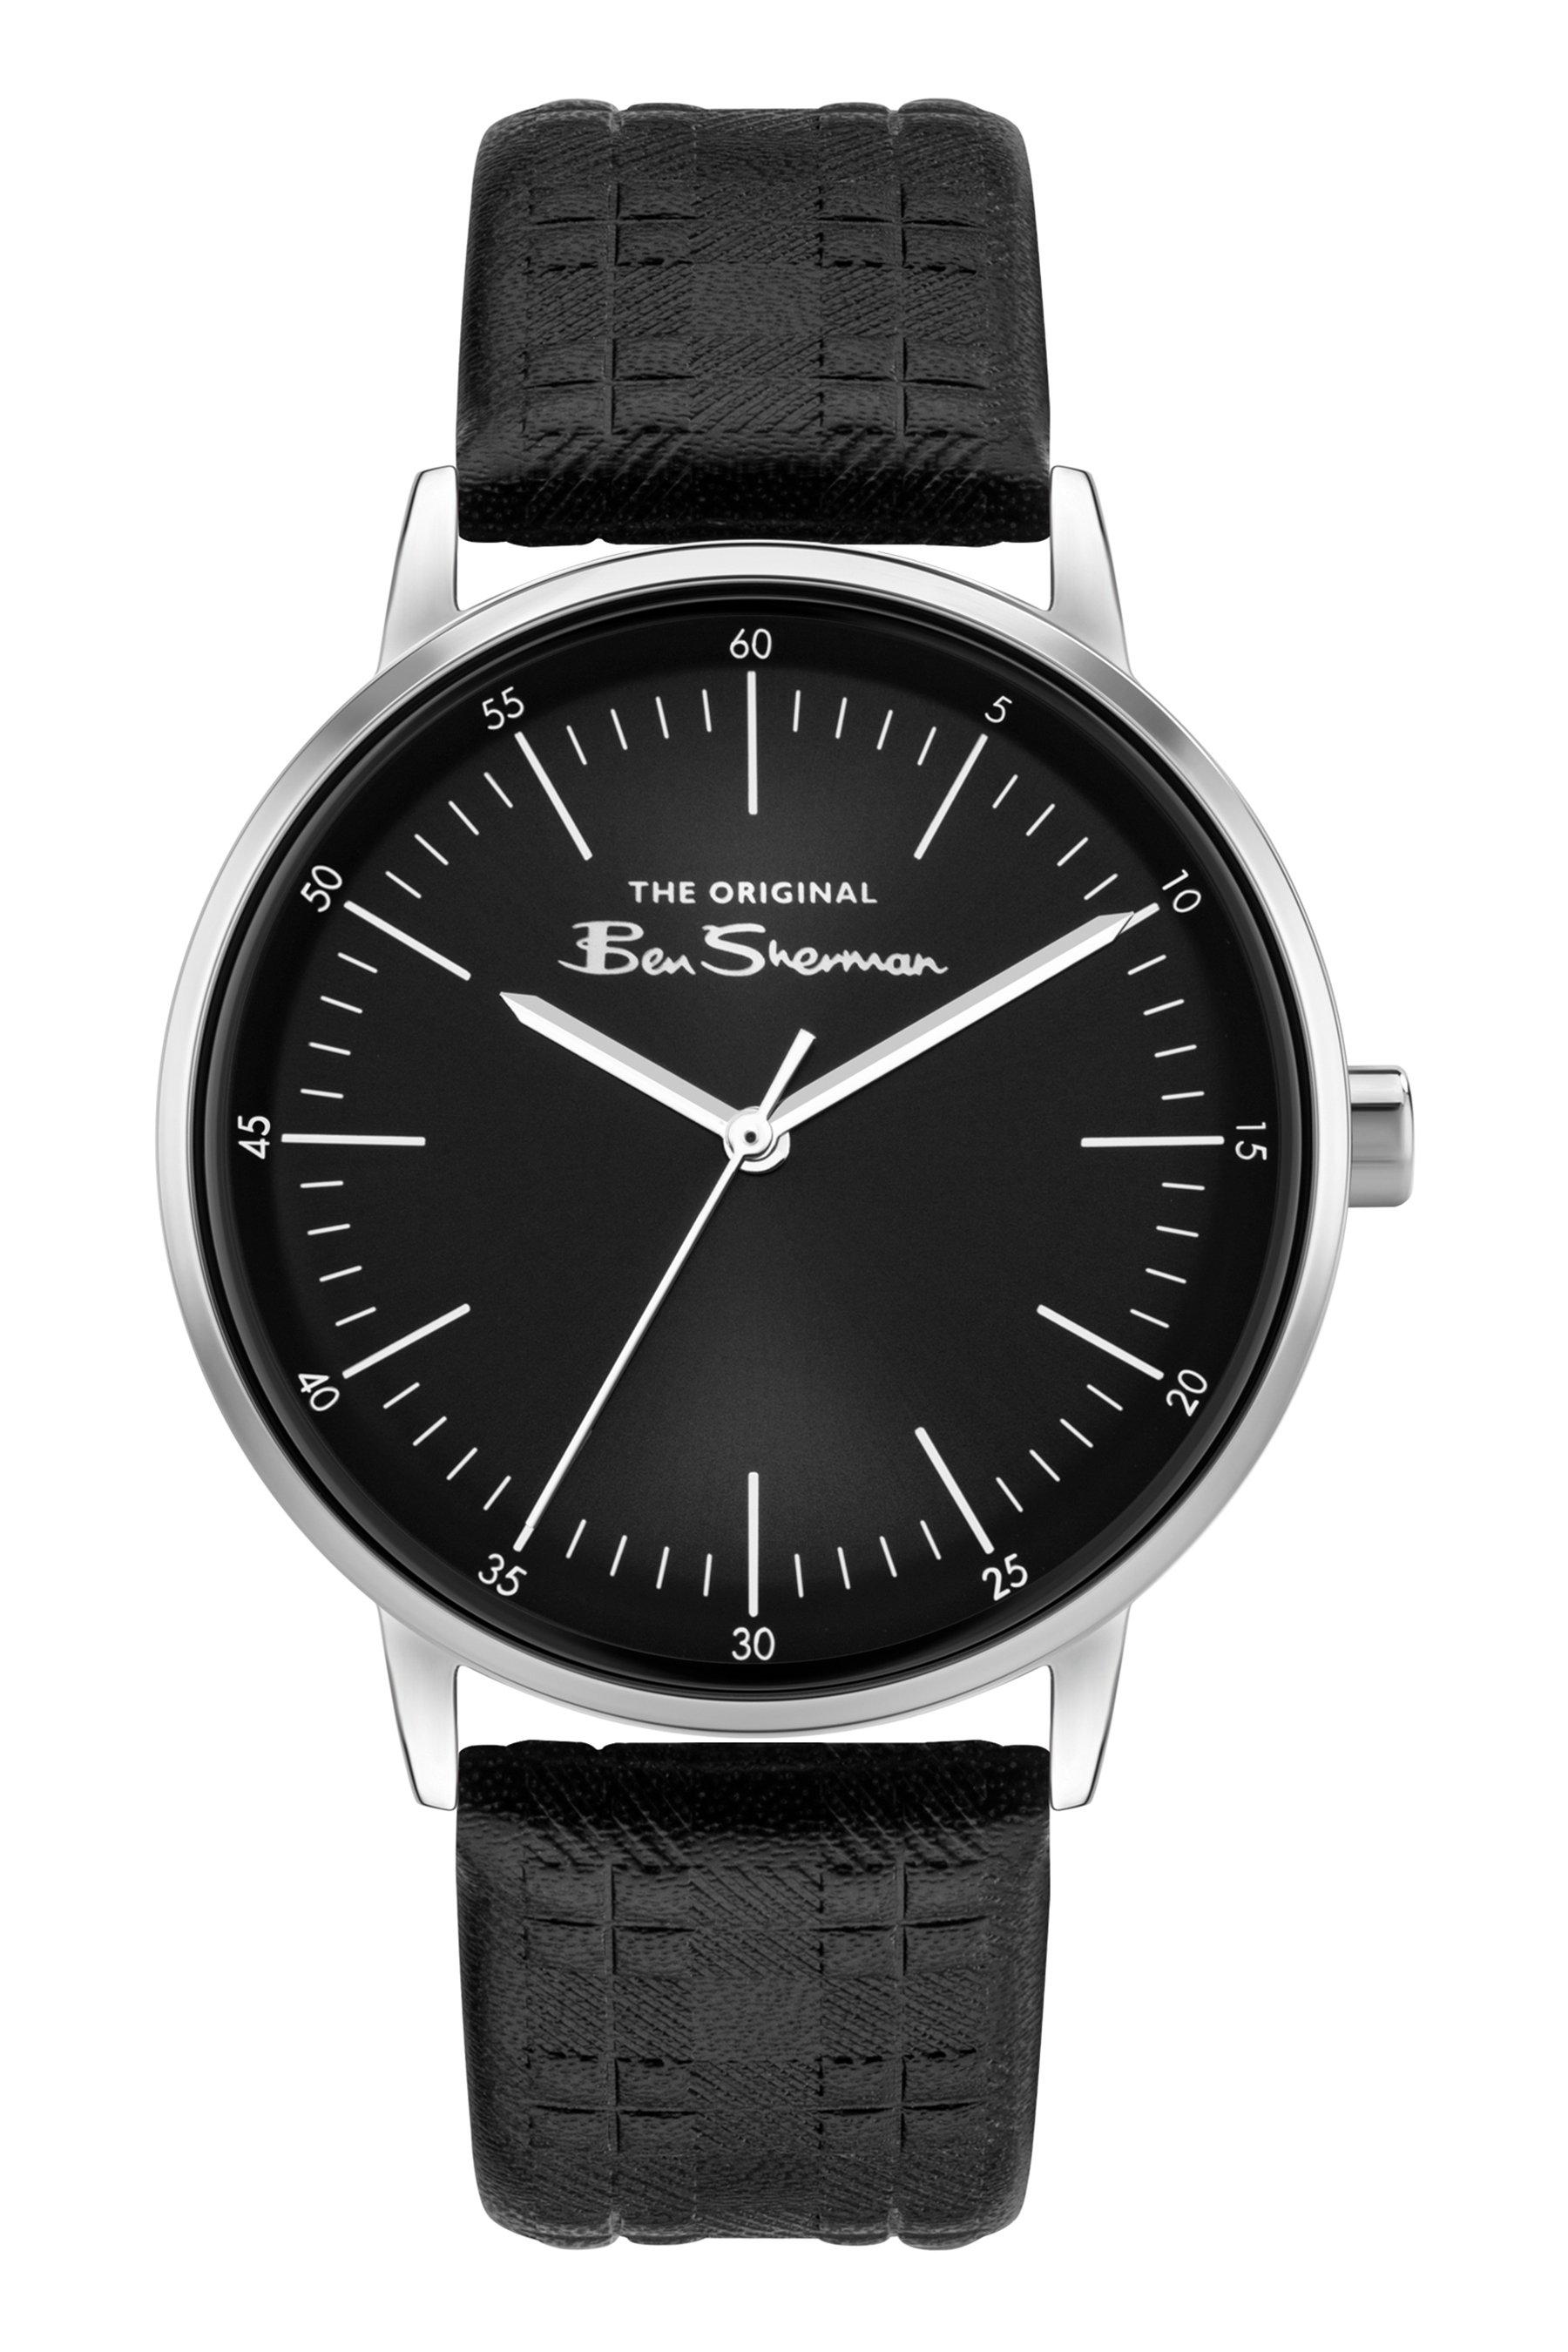 ben sherman watch with a checked strap and black dial - leather